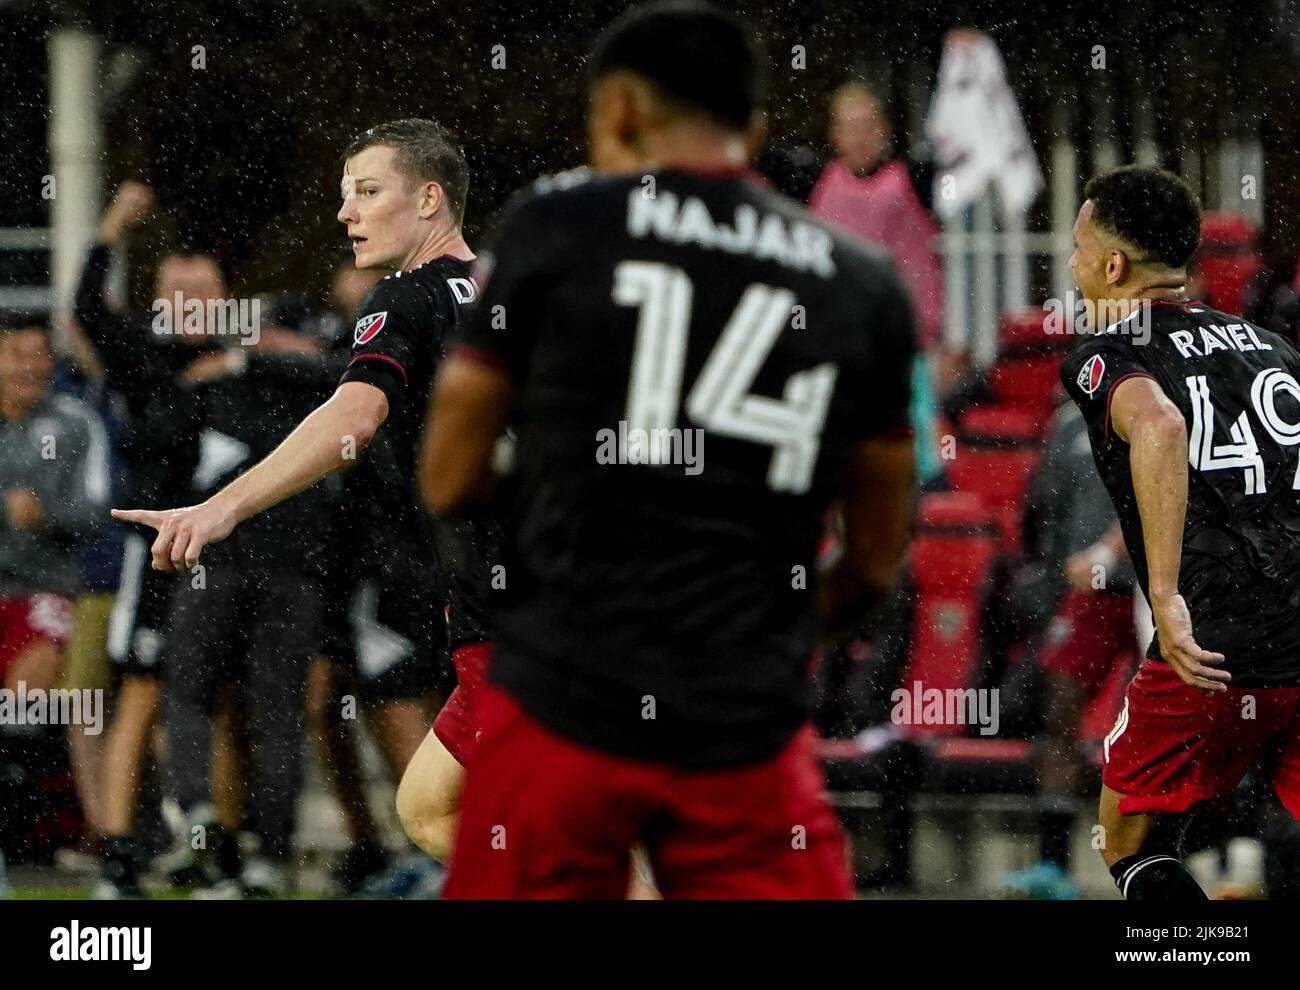 WASHINGTON, DC, USA - 31 JULY 2022: D.C. United midfielder Chris Durkin (8) after scoring the tying goal in overtime during a MLS match between D.C United and the Orlando City SC, on July 31, 2022, at Audi Field, in Washington, DC. (Photo by Tony Quinn-Alamy Live News) Stock Photo